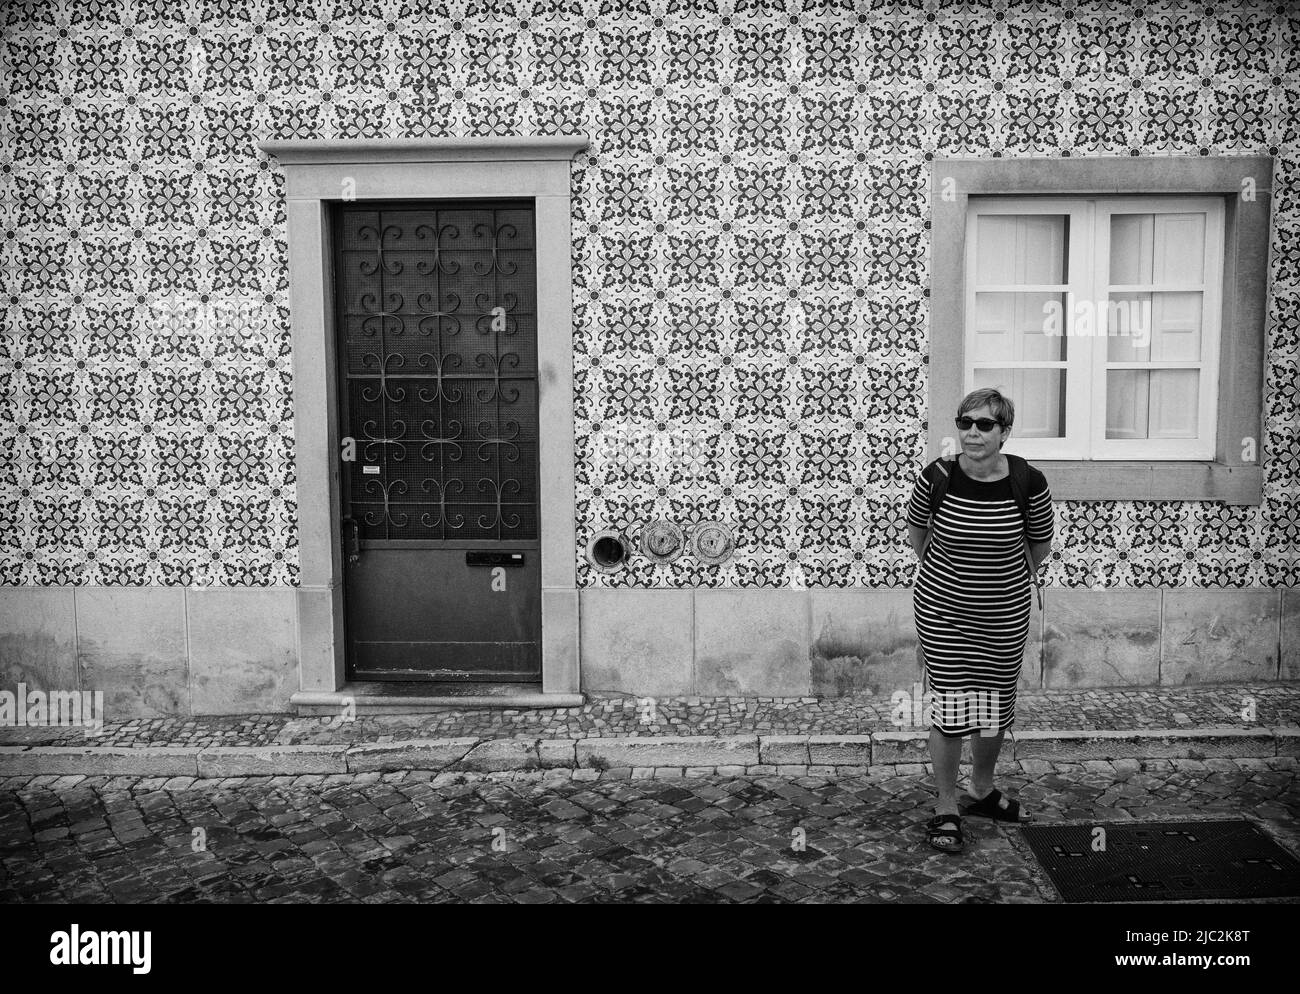 Traditional tiled house and woman in striped dress, Tavira, Algarve, Portugal Stock Photo